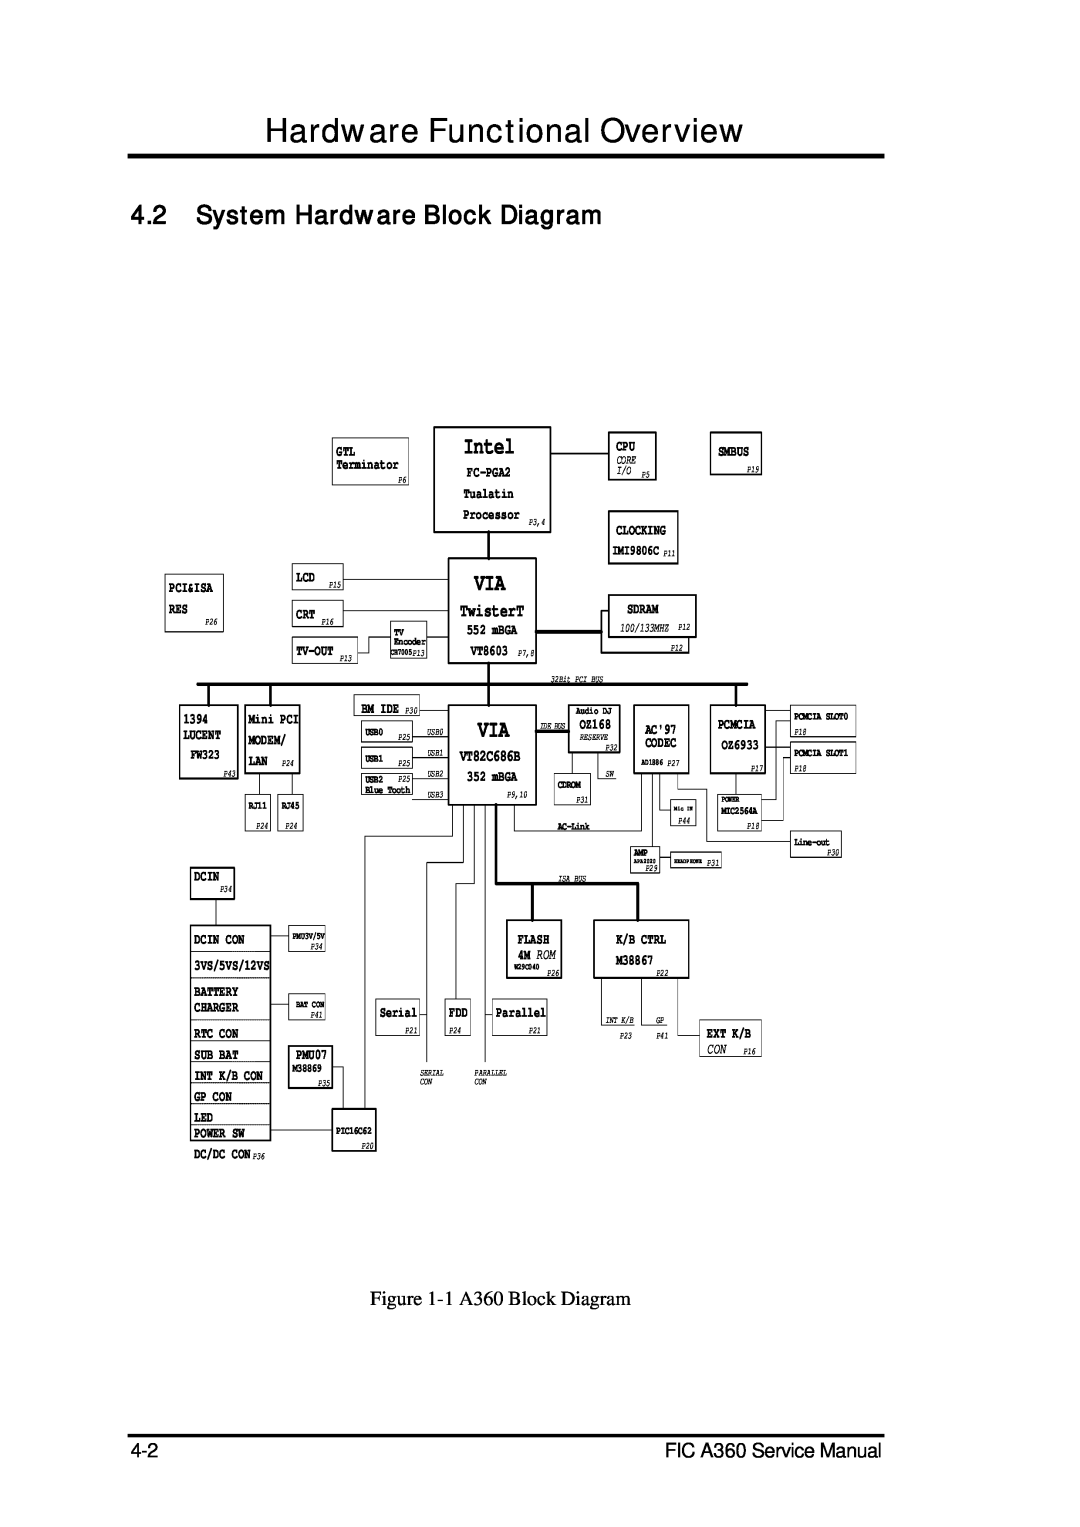 FIC Hardware Functional Overview, System Hardware Block Diagram, Intel, FIC A360 Service Manual, Dcin, Smbus, RES P26 